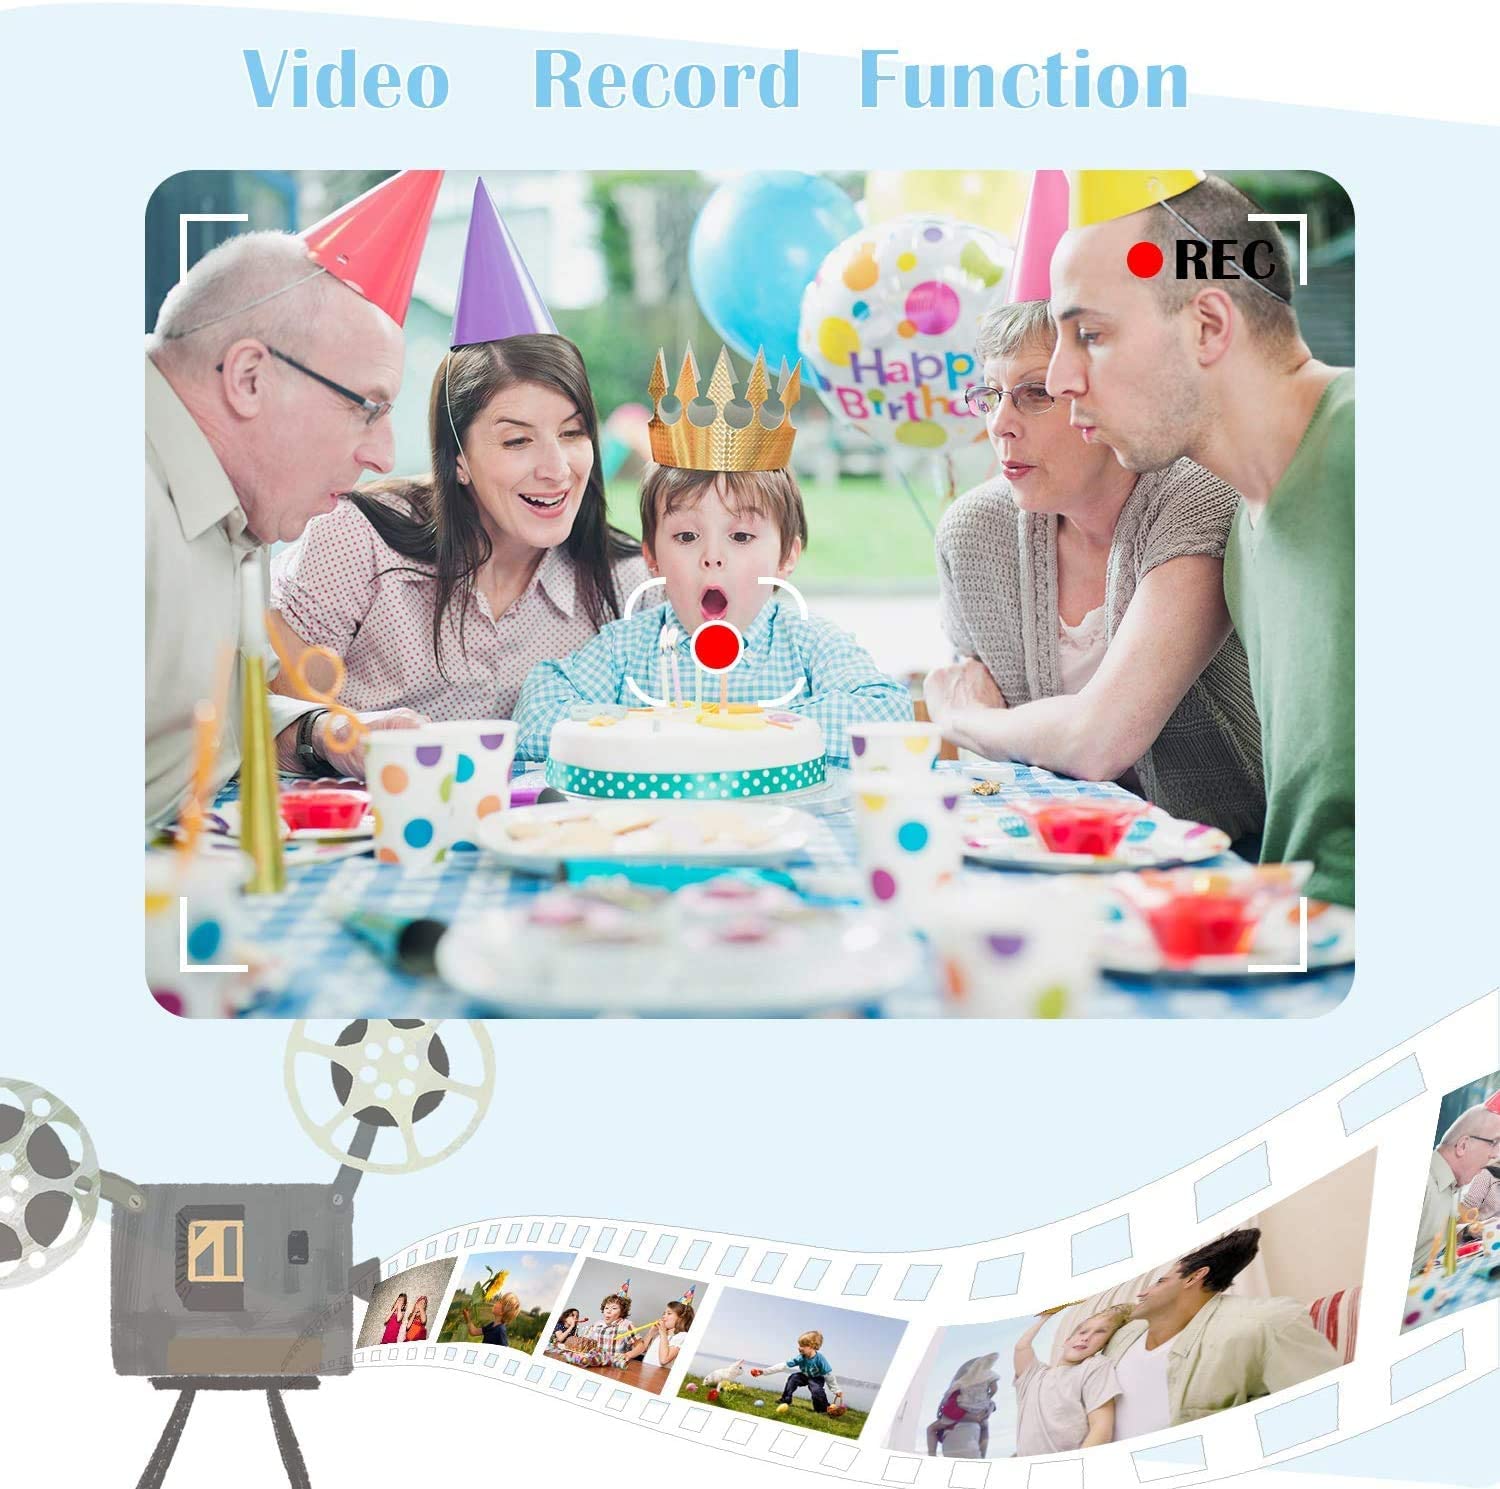 HD Digital Video Camera Toy for Toddler